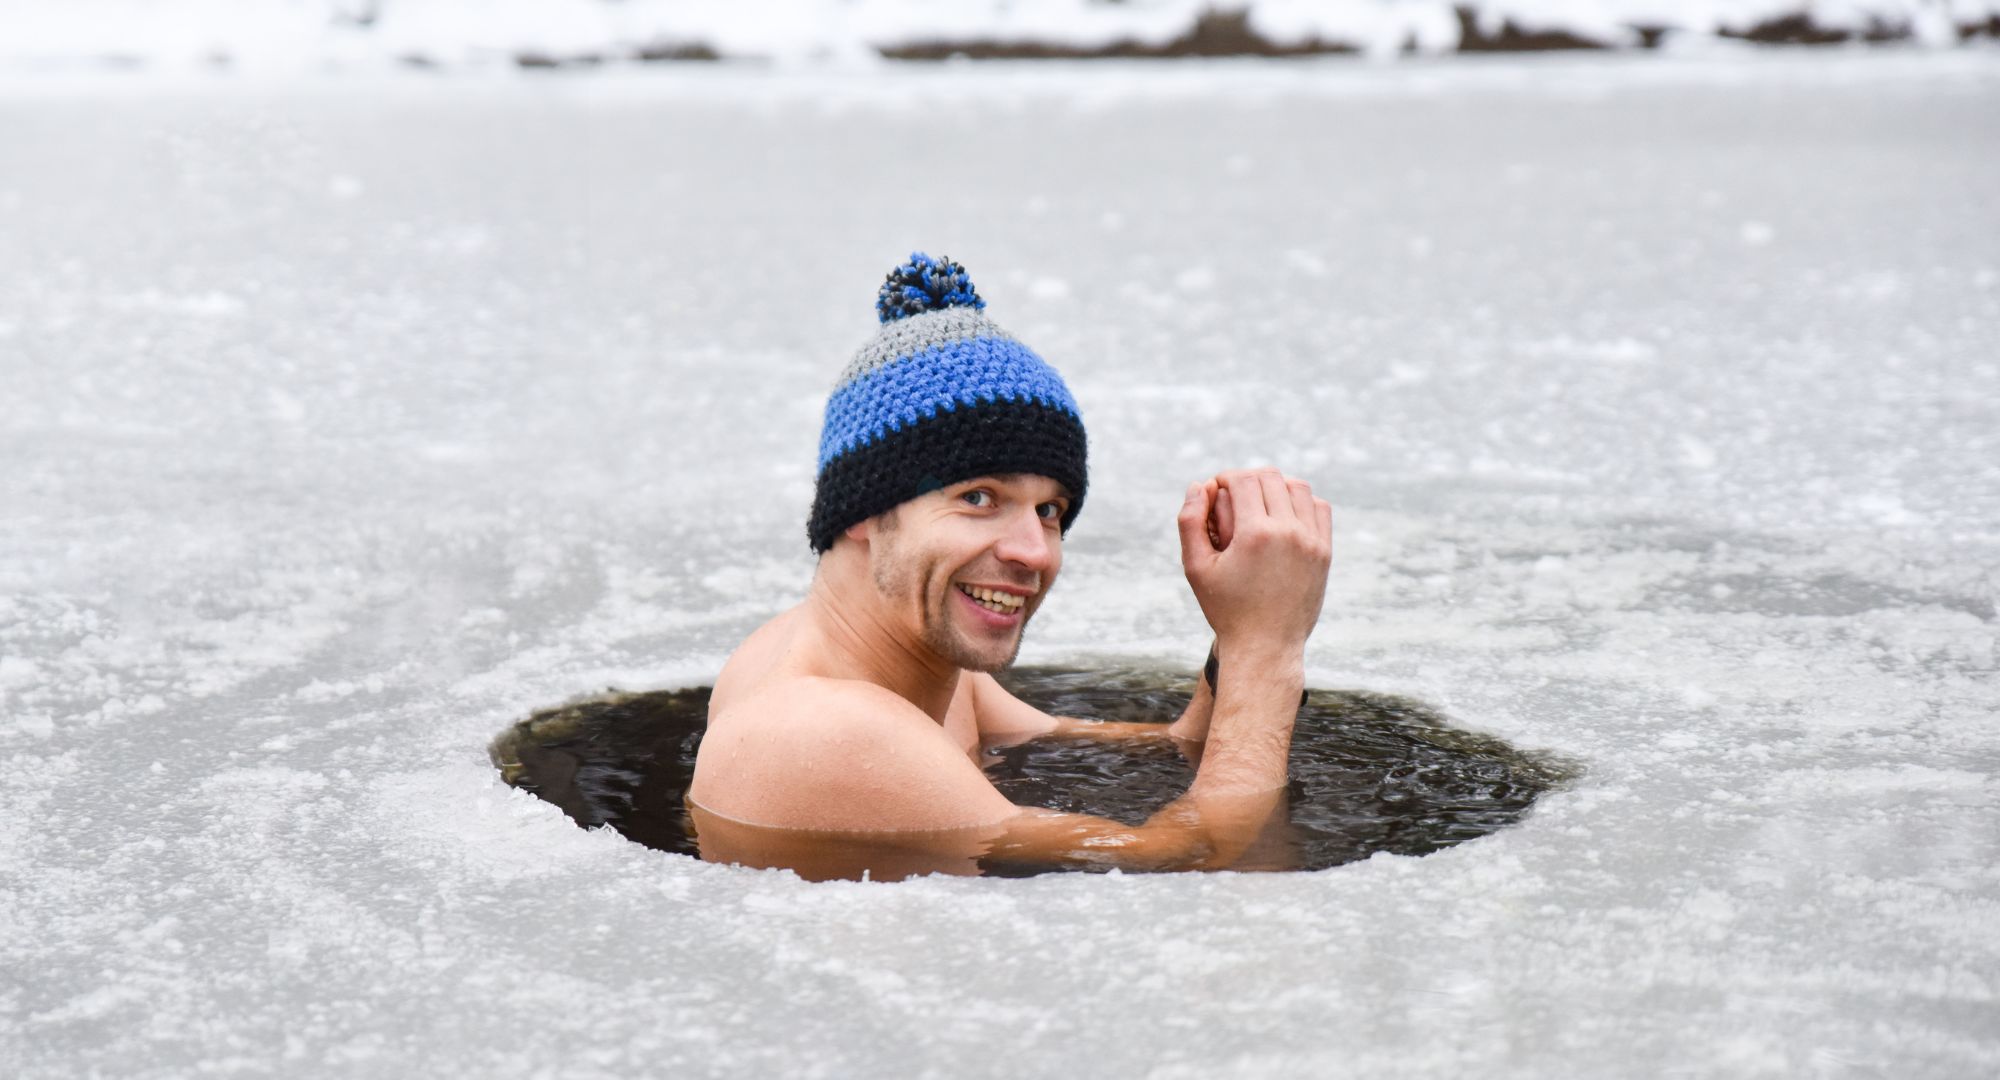 Young man have bath in cold water and does Wim hof method